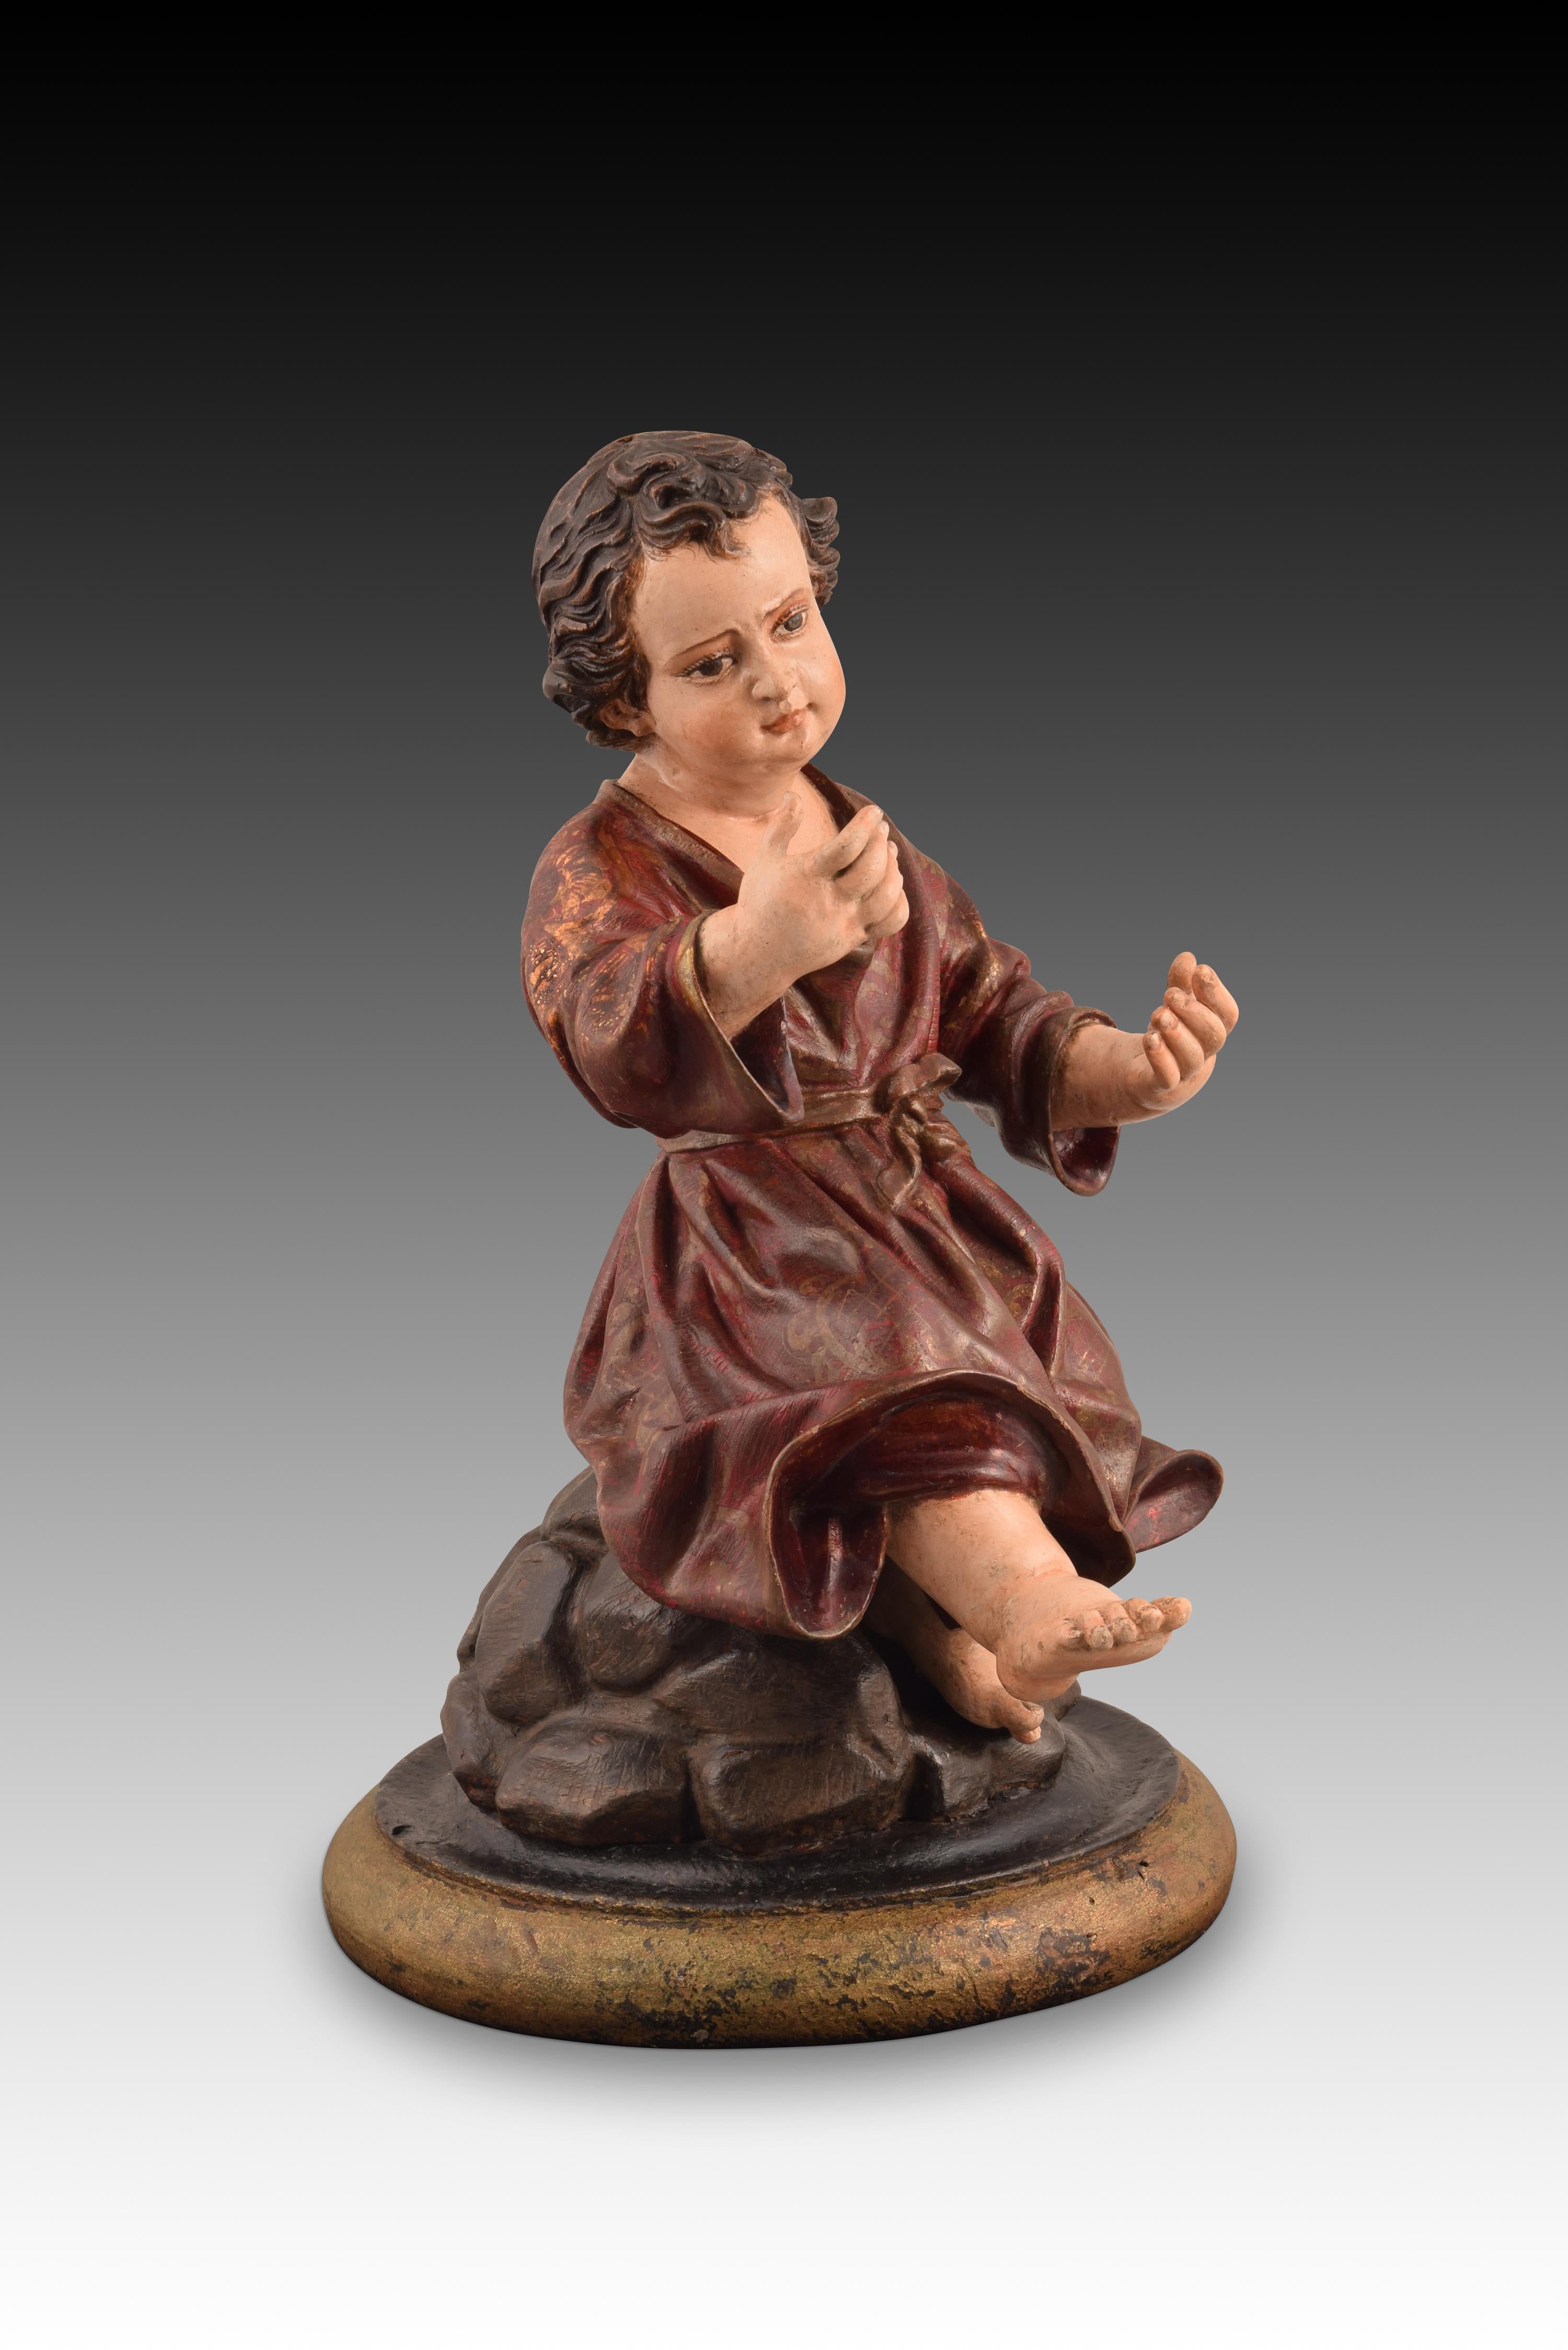 18th Century and Earlier Child Jesus of the Passion. Wood. Andalusian School, Spain, 18th century.